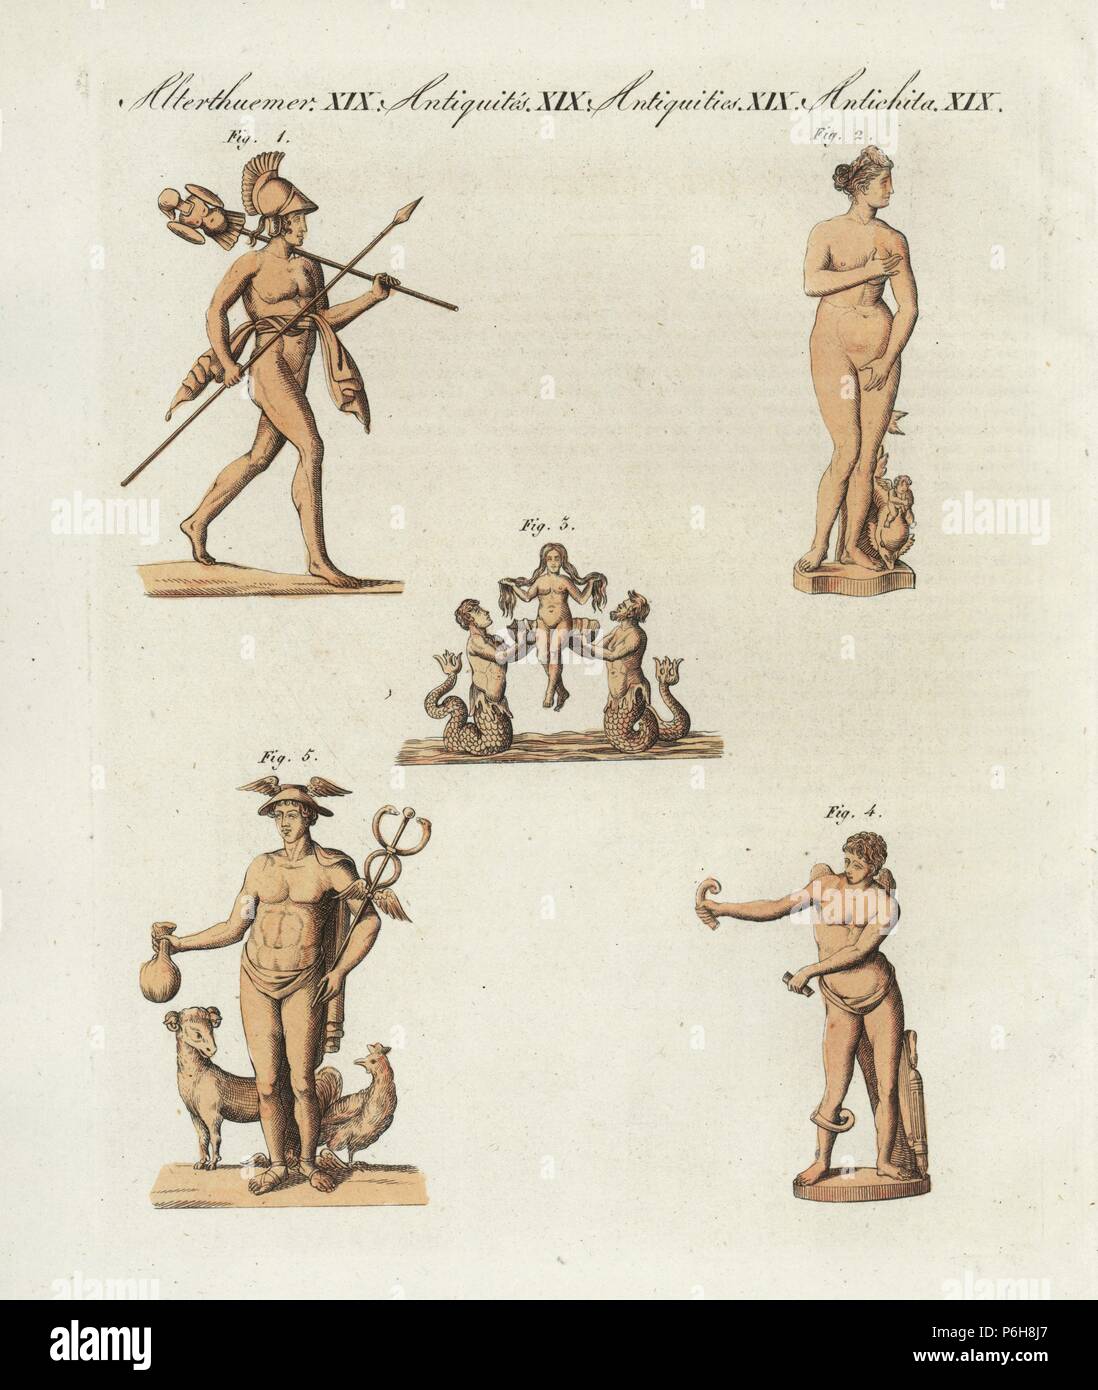 Greek and Roman gods: Mars 1, Venus 2,3, Eros 4, and Mercury 5. Handcoloured copperplate engraving from Bertuch's 'Bilderbuch fur Kinder' (Picture Book for Children), Weimar, 1805. Friedrich Johann Bertuch (1747-1822) was a German publisher and man of arts most famous for his 12-volume encyclopedia for children illustrated with 1,200 engraved plates on natural history, science, costume, mythology, etc., published from 1790-1830. Stock Photo